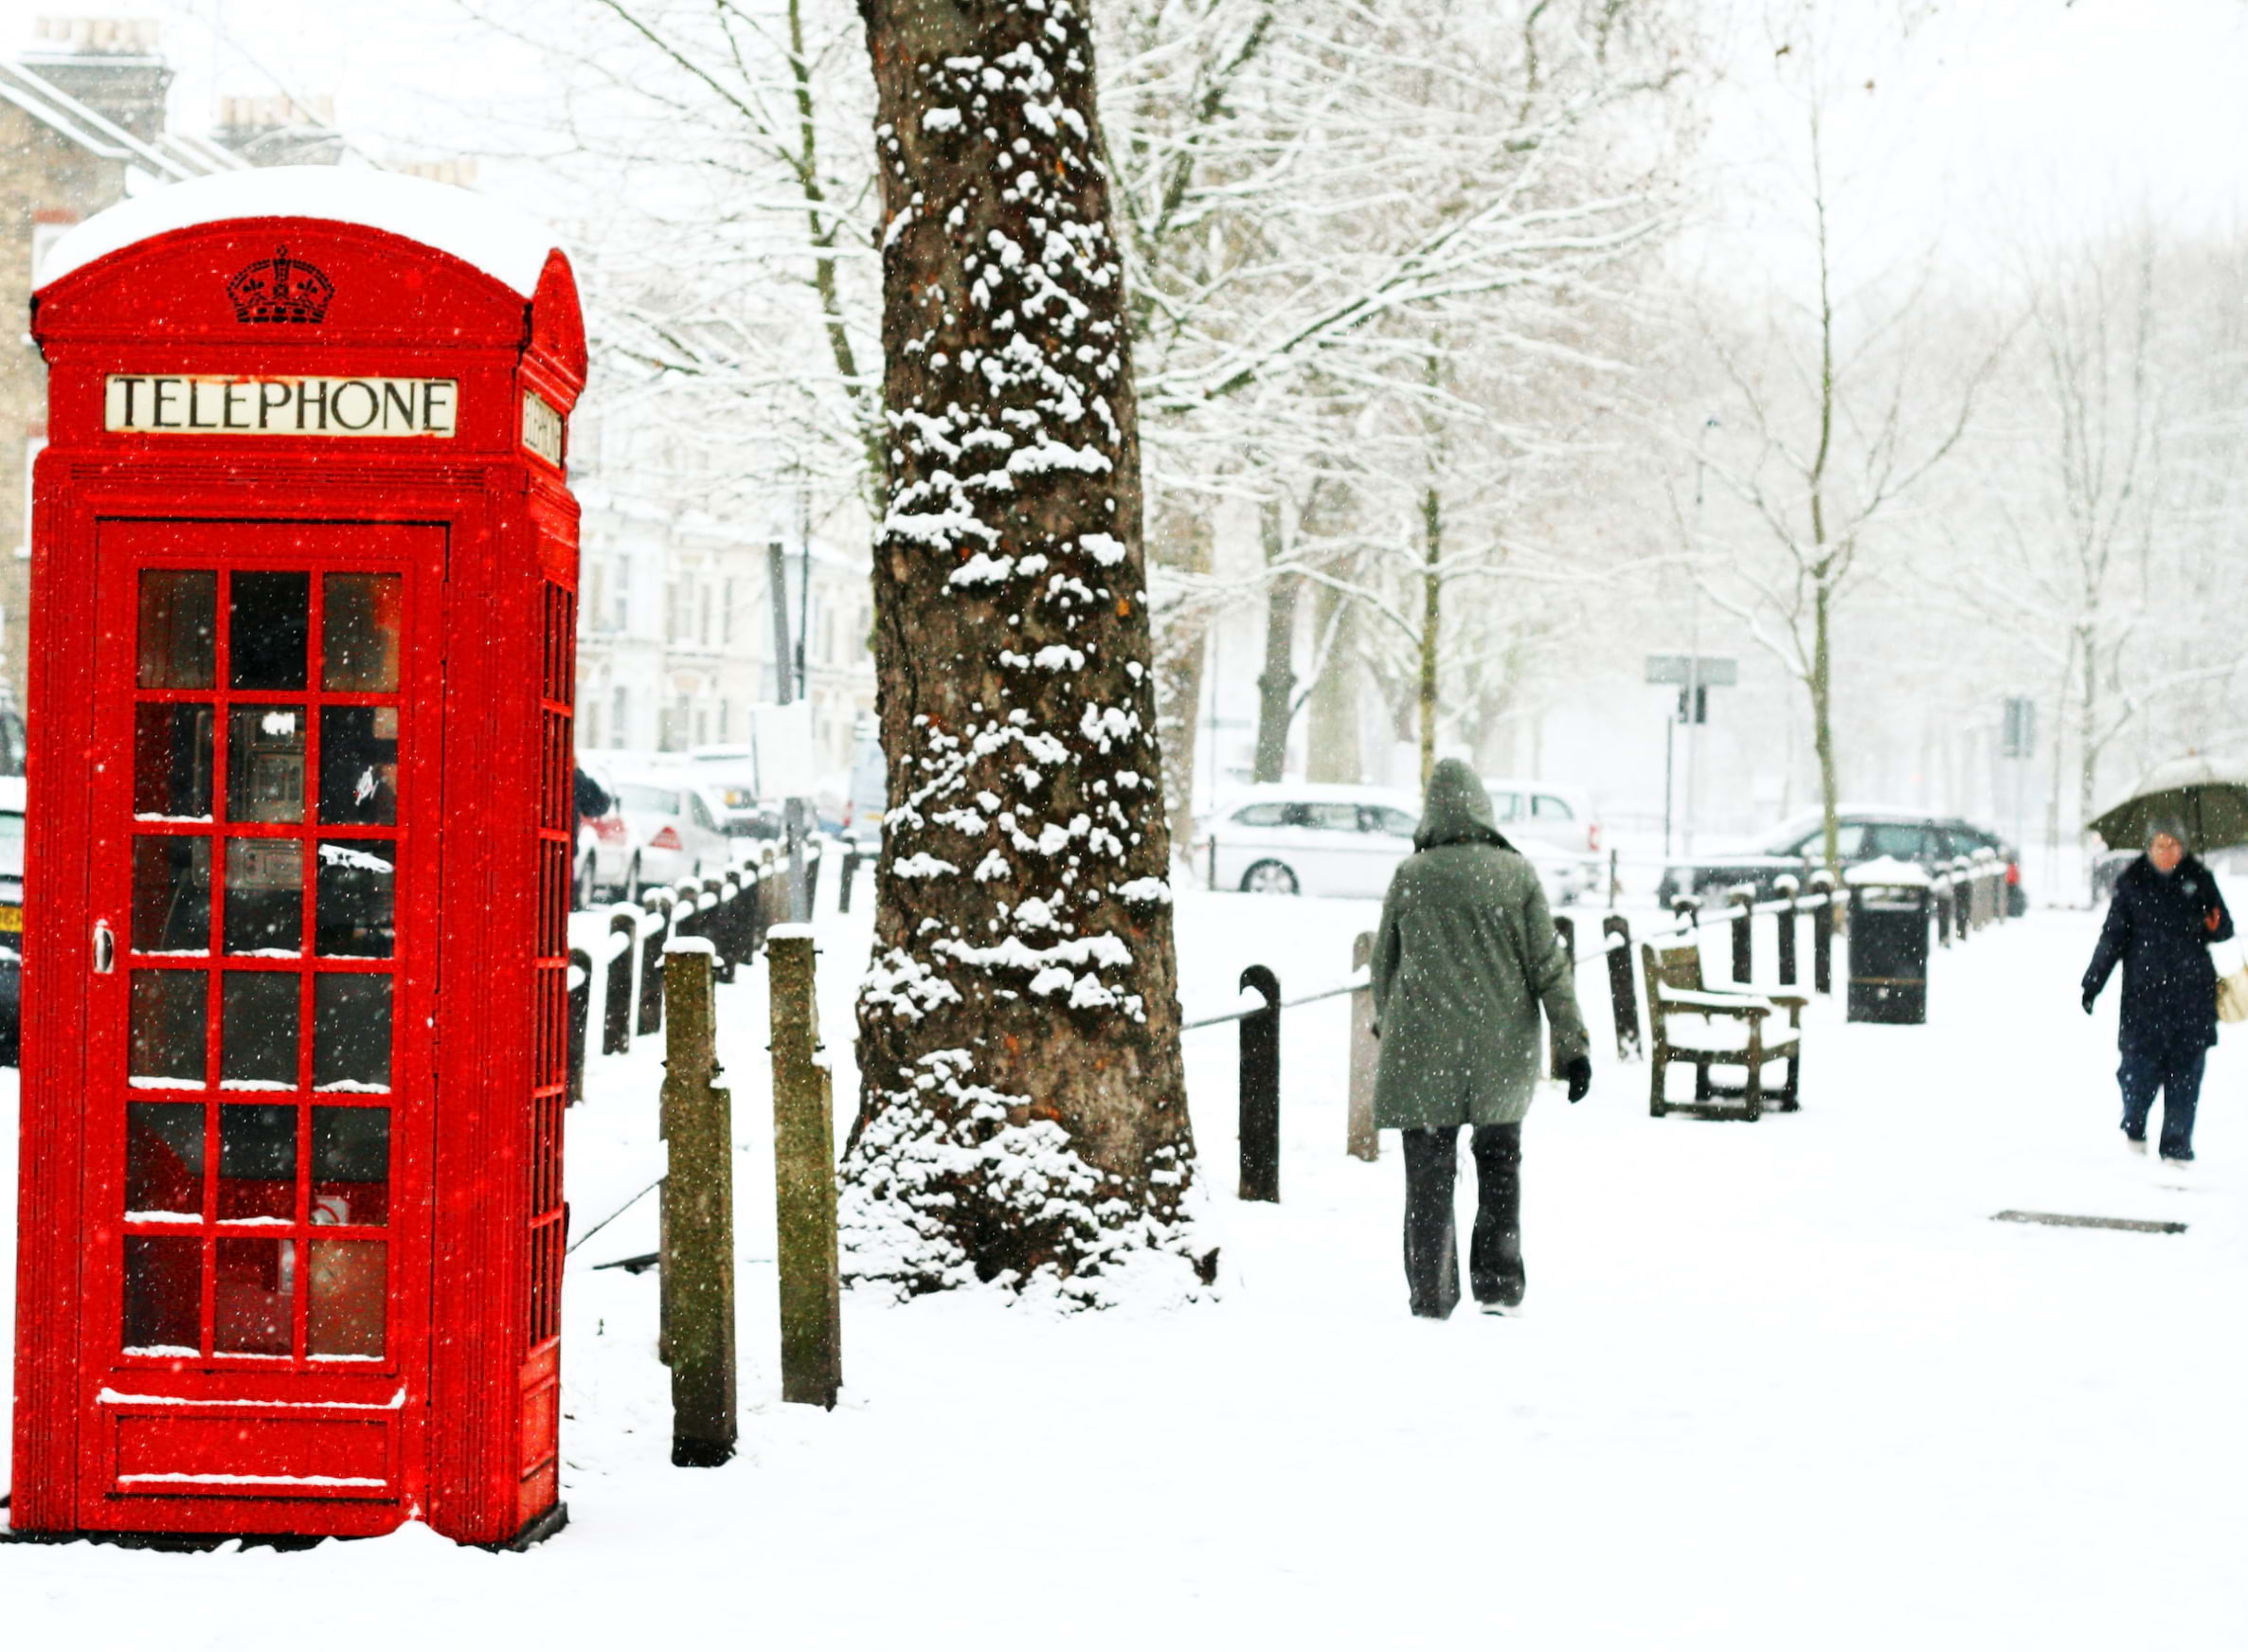 Guide to winter activities in London